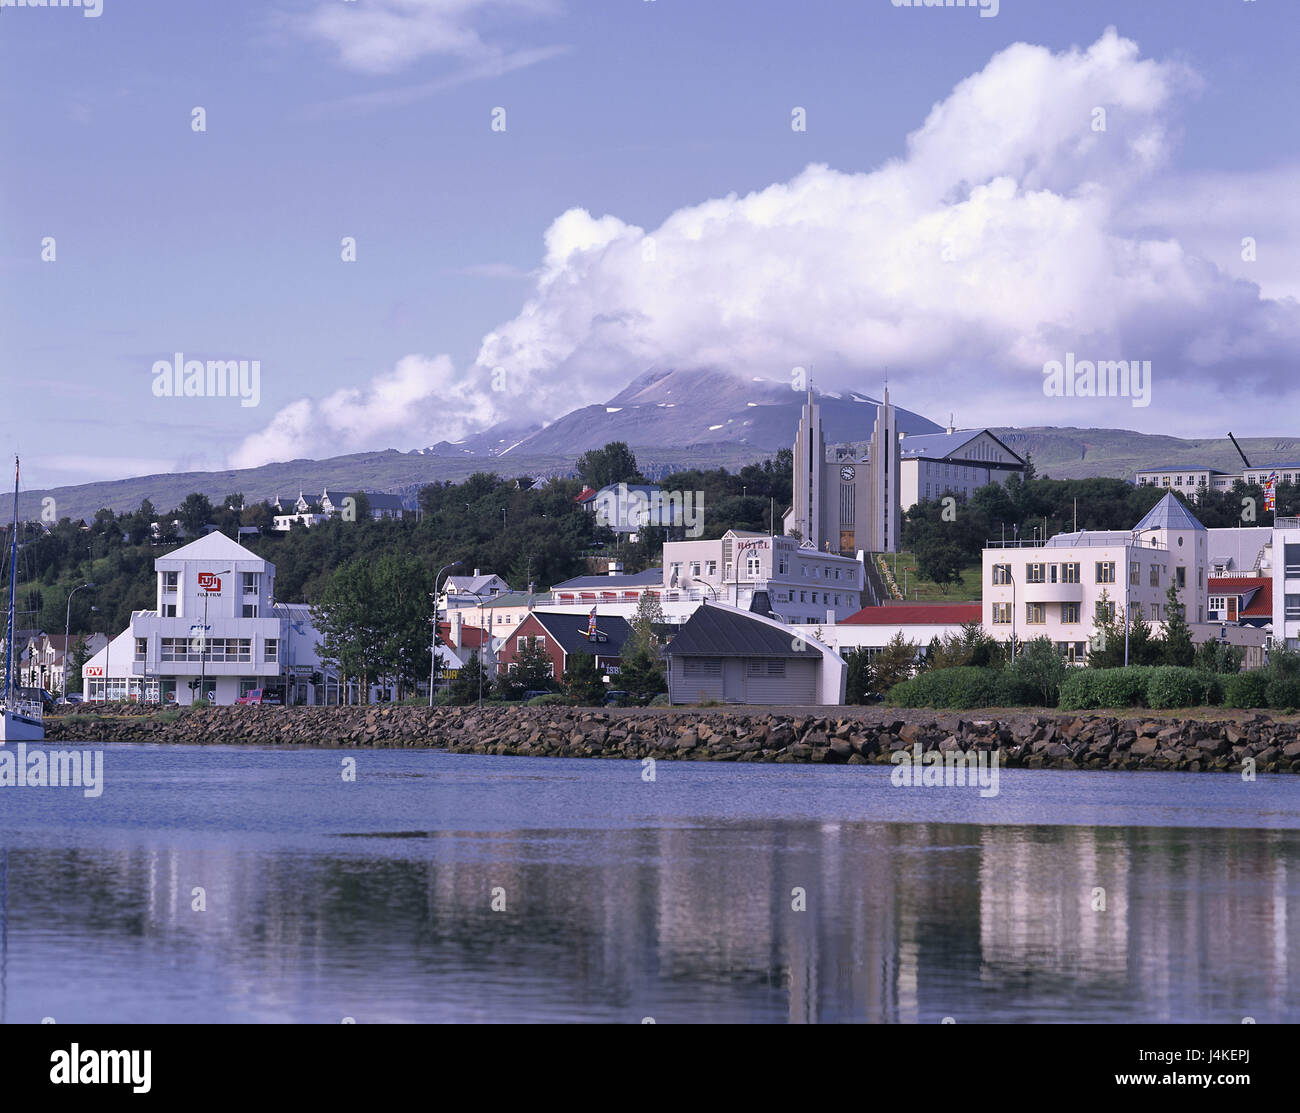 Iceland, Akureyri, town view, church Europe, island, Iceland, Nordisland, the north, town, parish church, harbour basin, monument, statue, place of interest Stock Photo